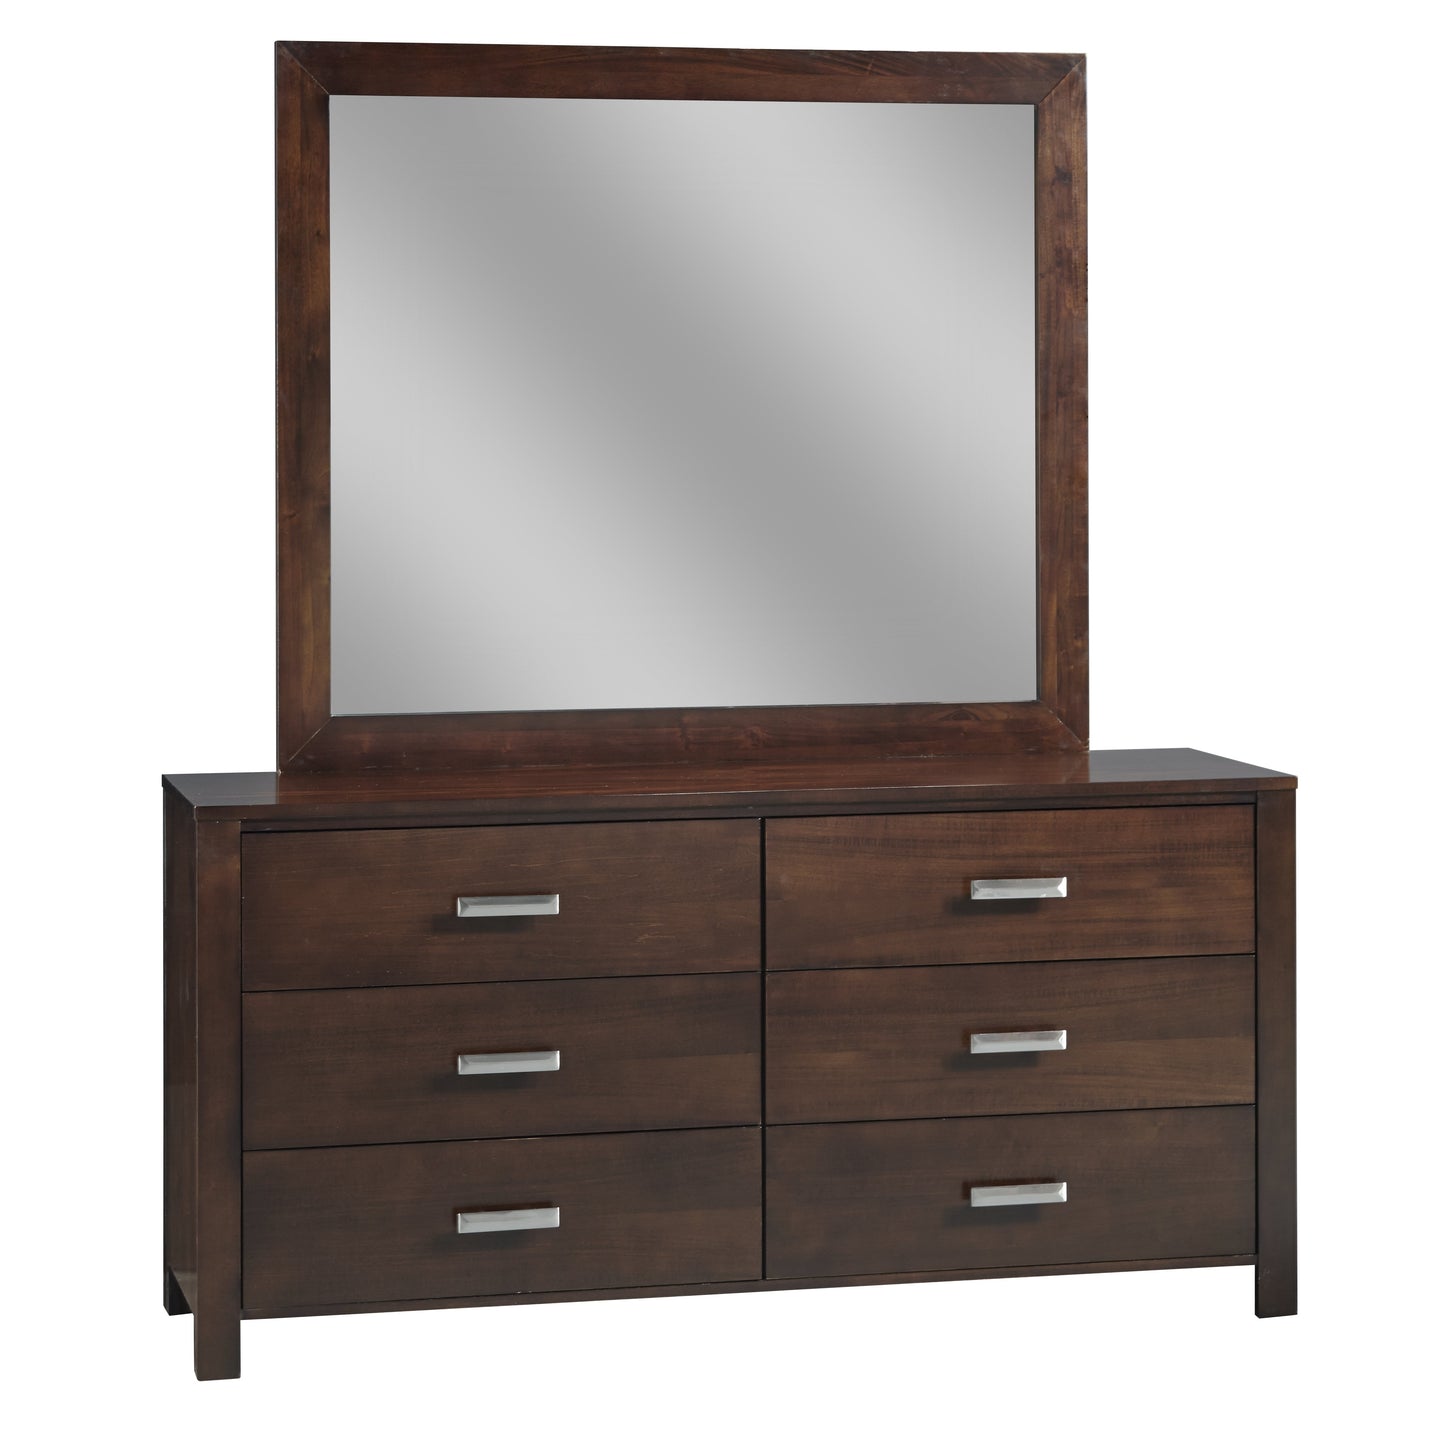 Modus Riva 5PC E King Storage Bedroom Set w Chest in Chocolate Brown